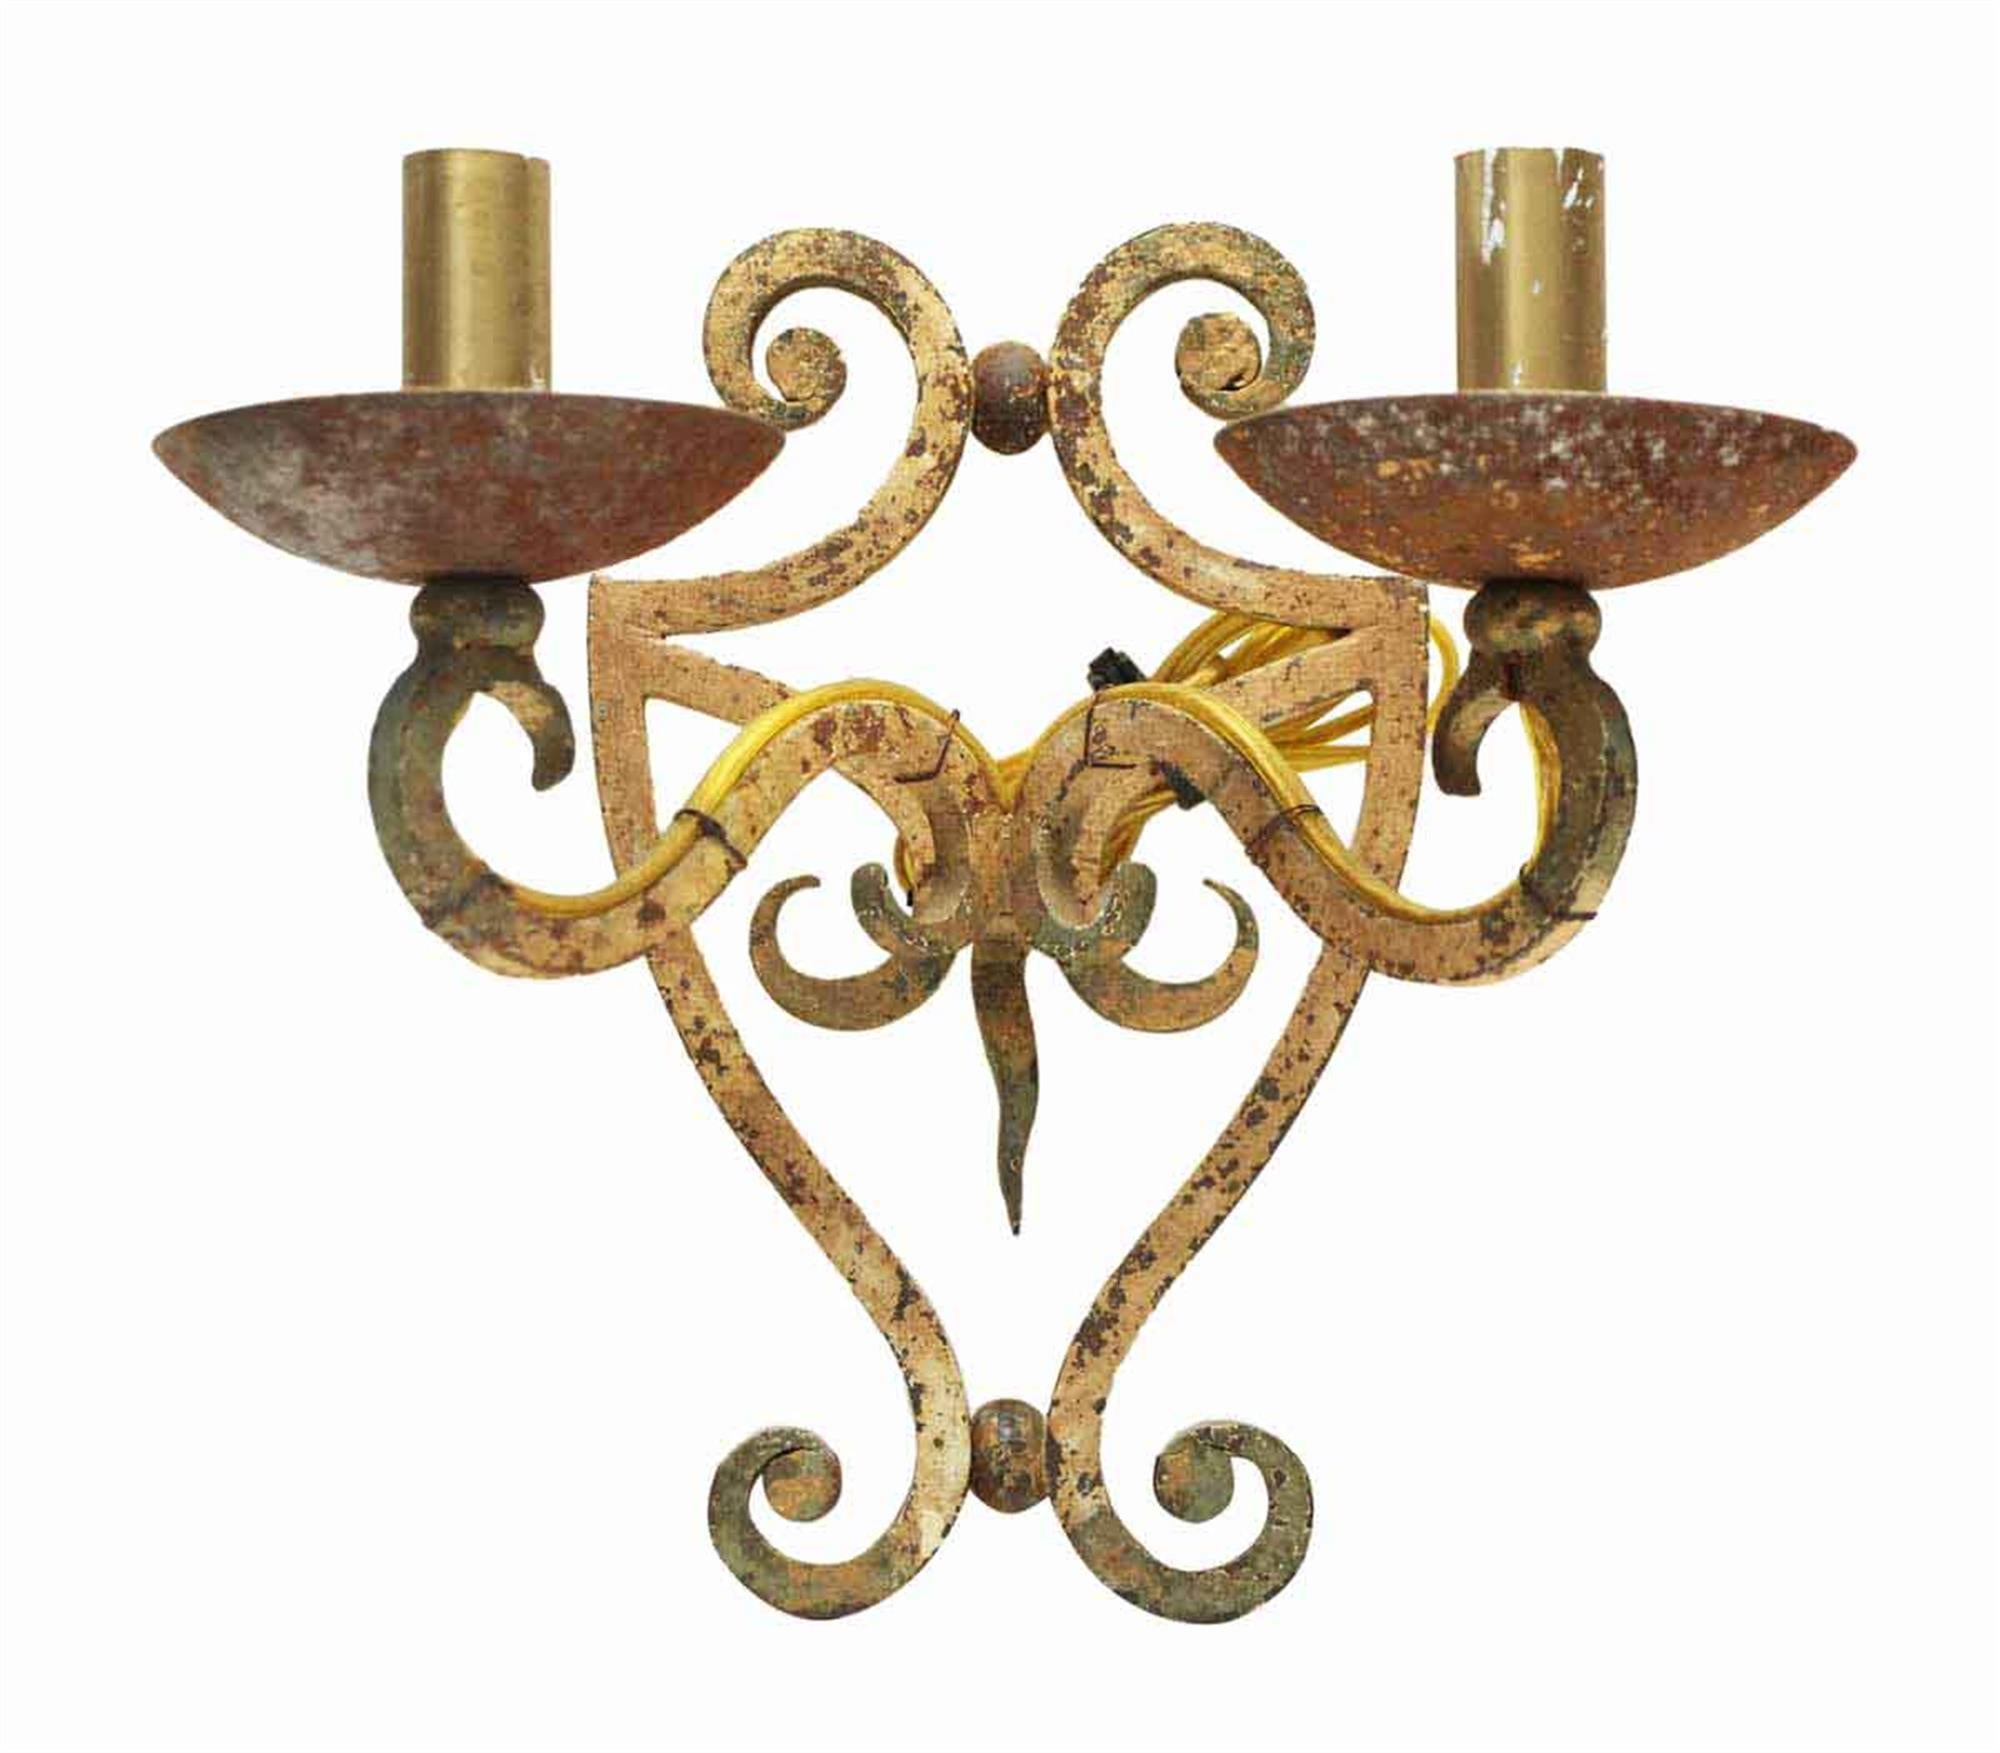 1980s distressed light tan painted iron two arm sconces. They have been recently wired. Sold as a pair. This can be seen at our 400 Gilligan St location in Scranton, PA.